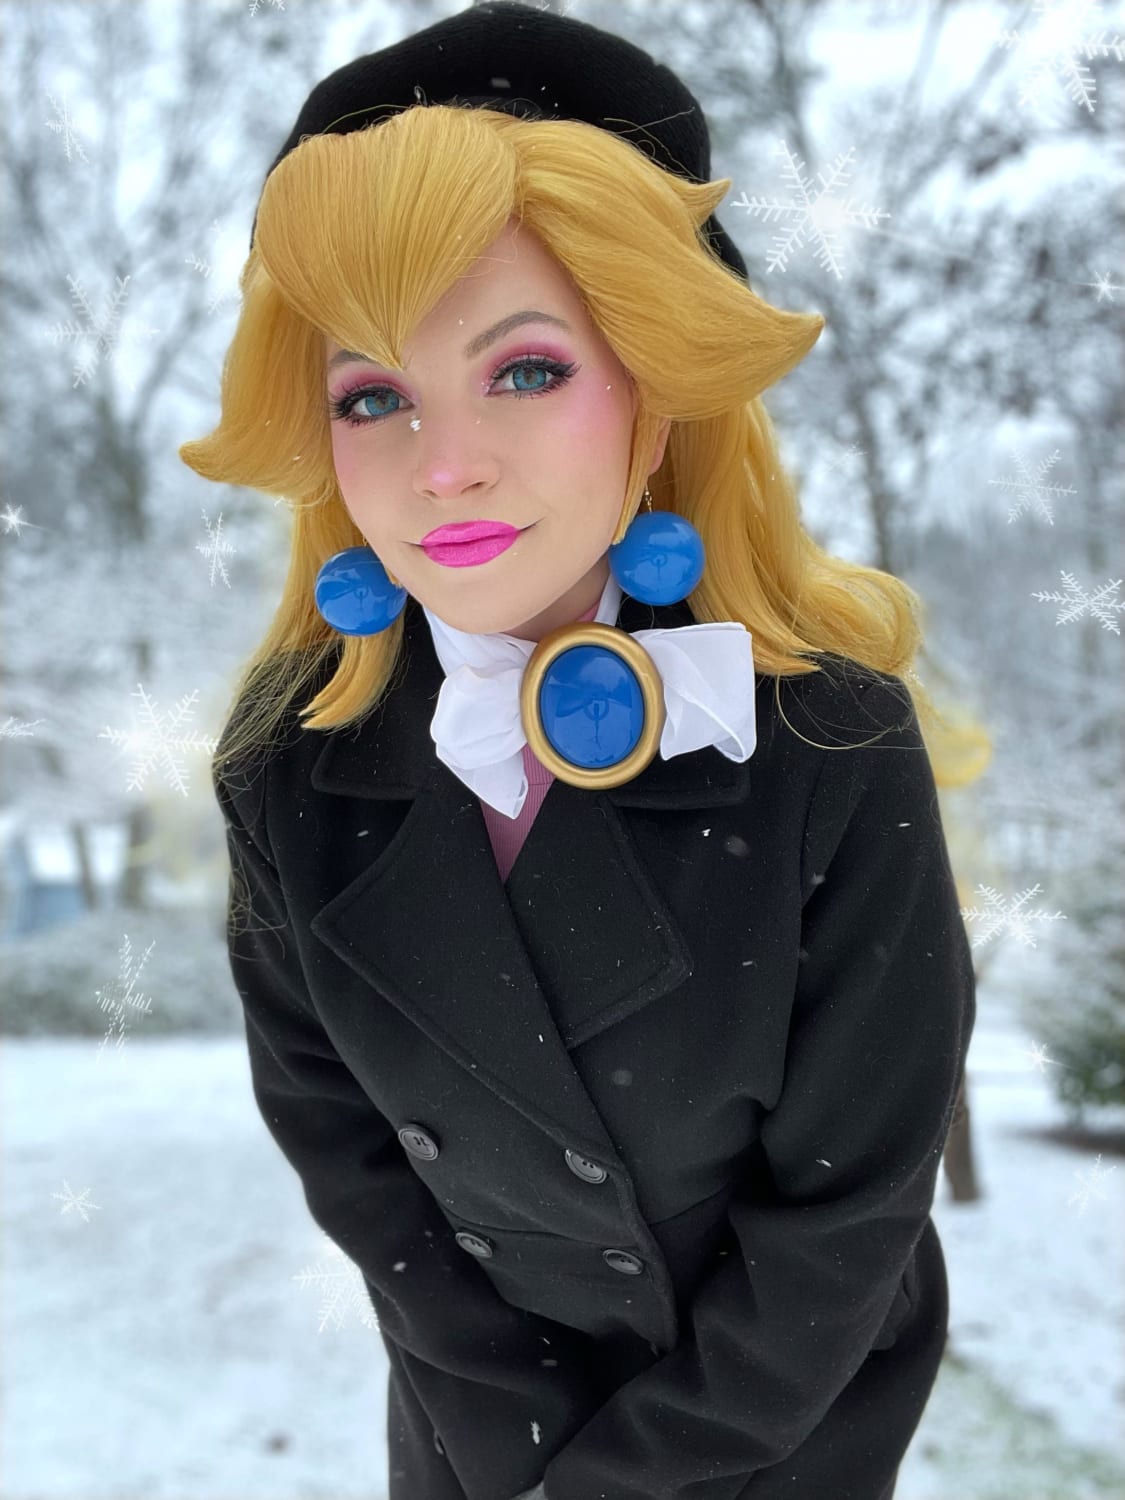 We finally got snow, so I cosplayed Peach’s winter outfit from Mario Odyssey!